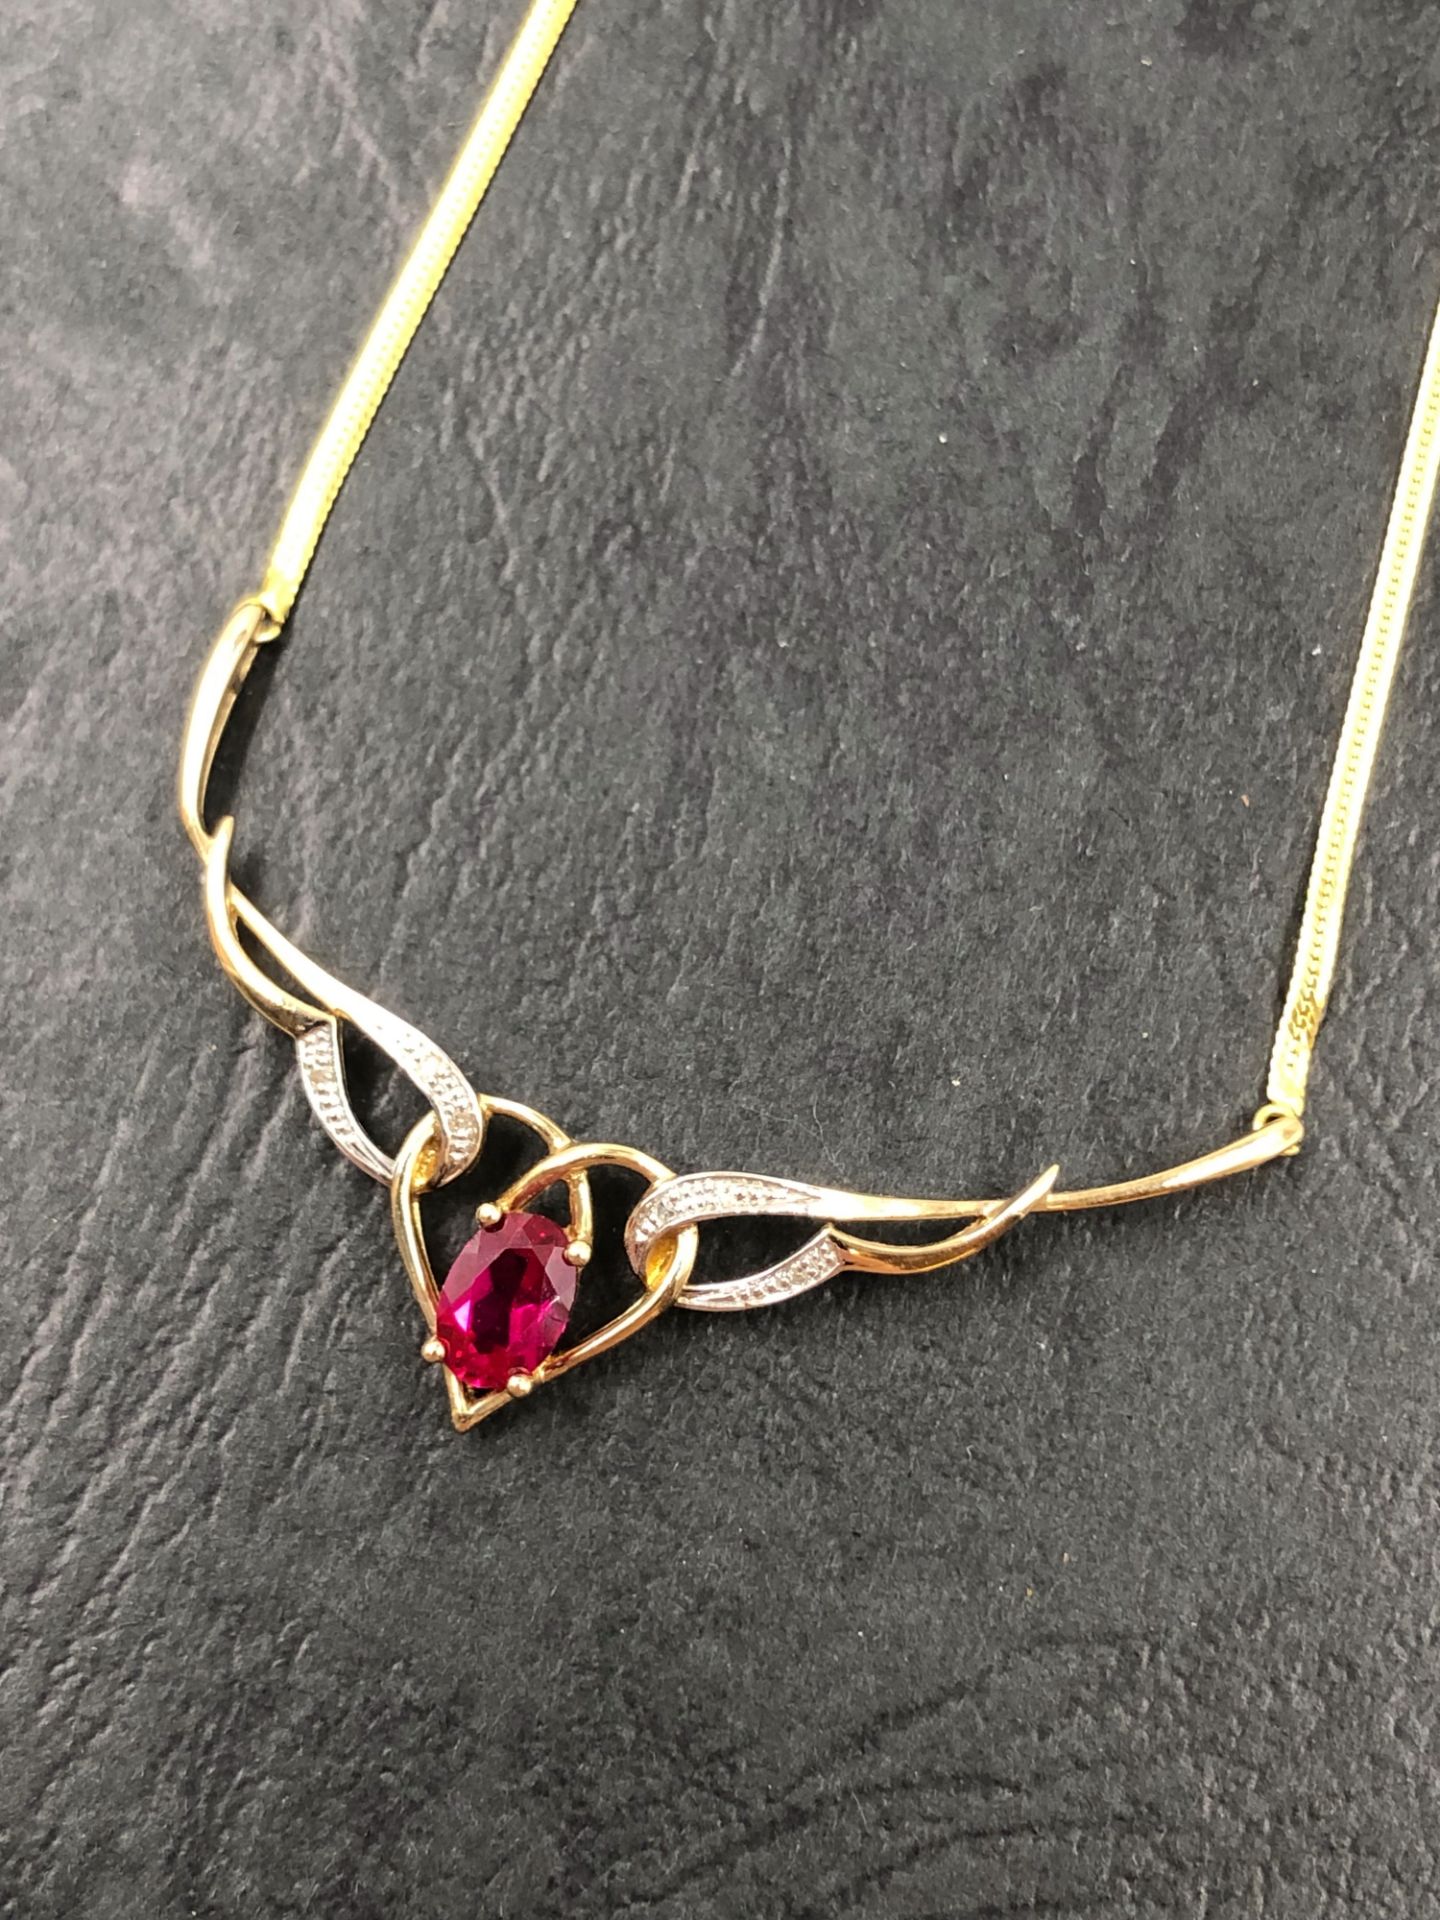 A HALLMARKED 9ct GOLD RUBY AND DIAMOND NECKLACE. THE OVAL CUT RUBY MEASUREMENTS 7.0 X 5.0 D 3.4mm.